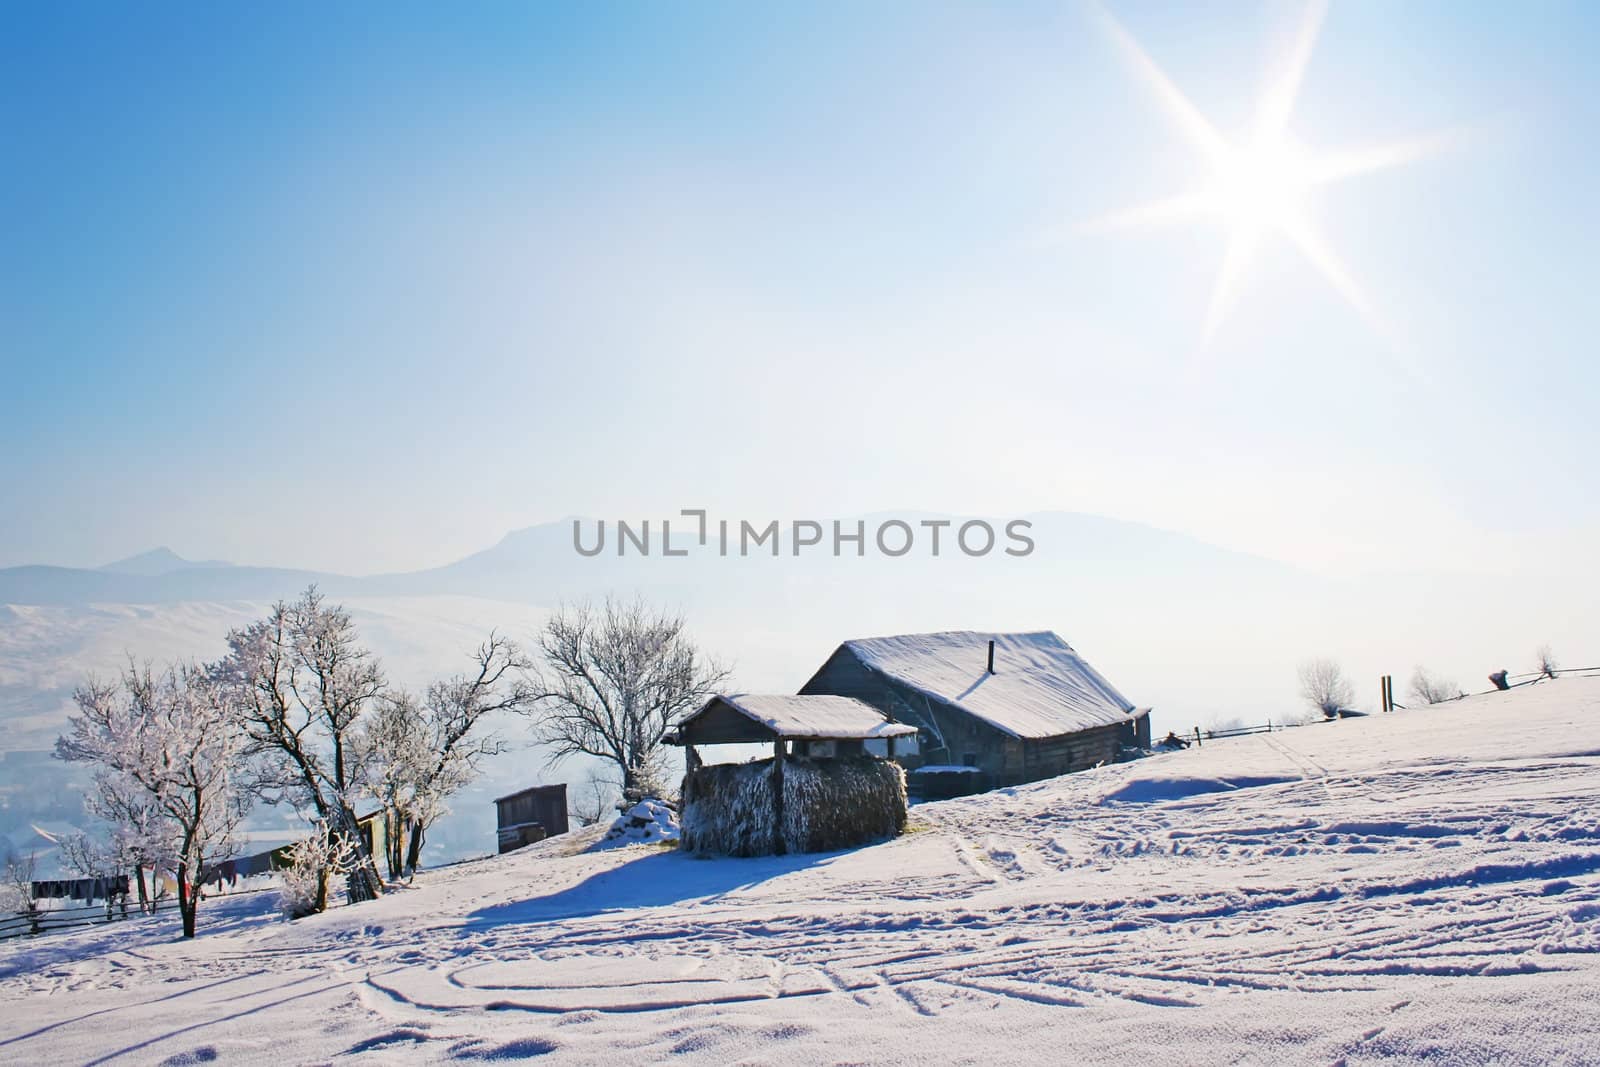 Lonely wooden house and trees in snow covered mountains under shiny blue sky